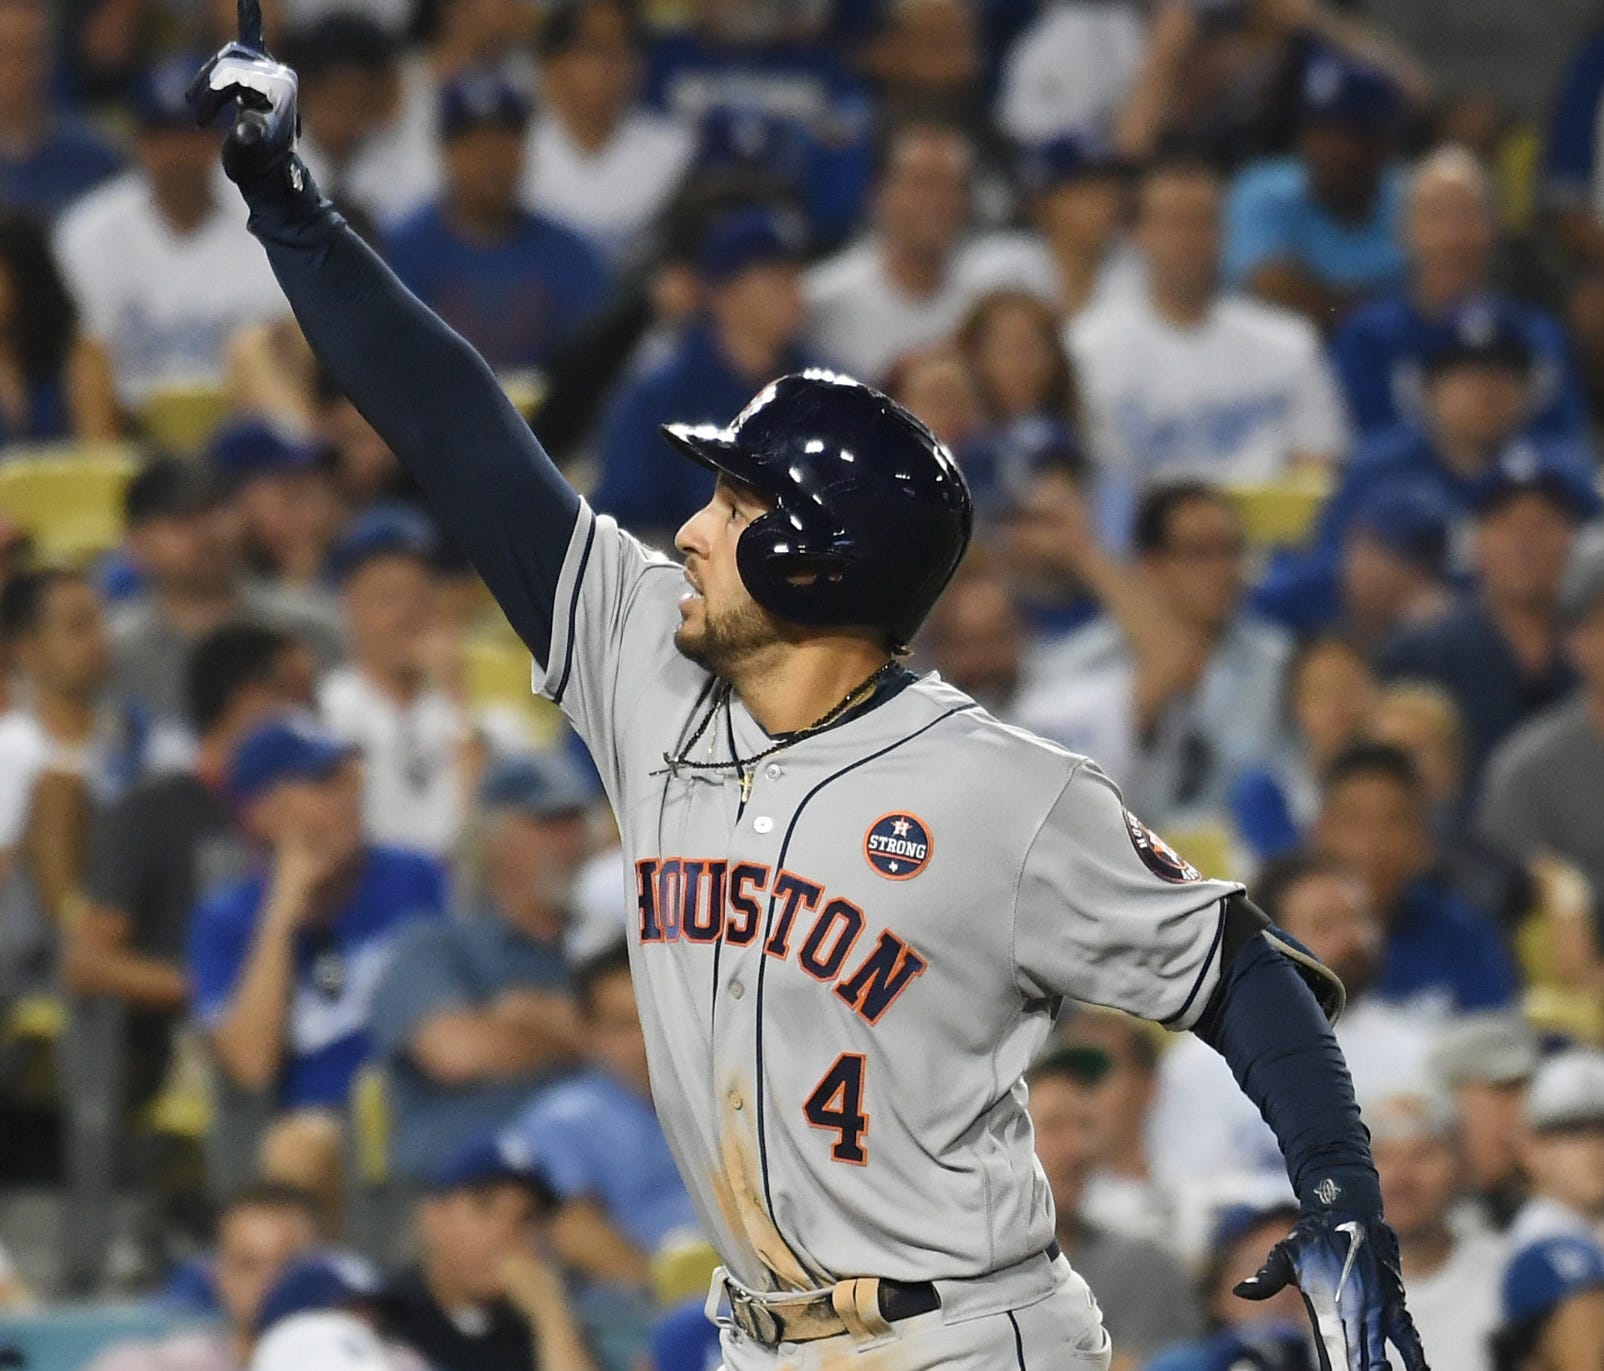 George Springer celebrates his two run home run in the 11th inning.